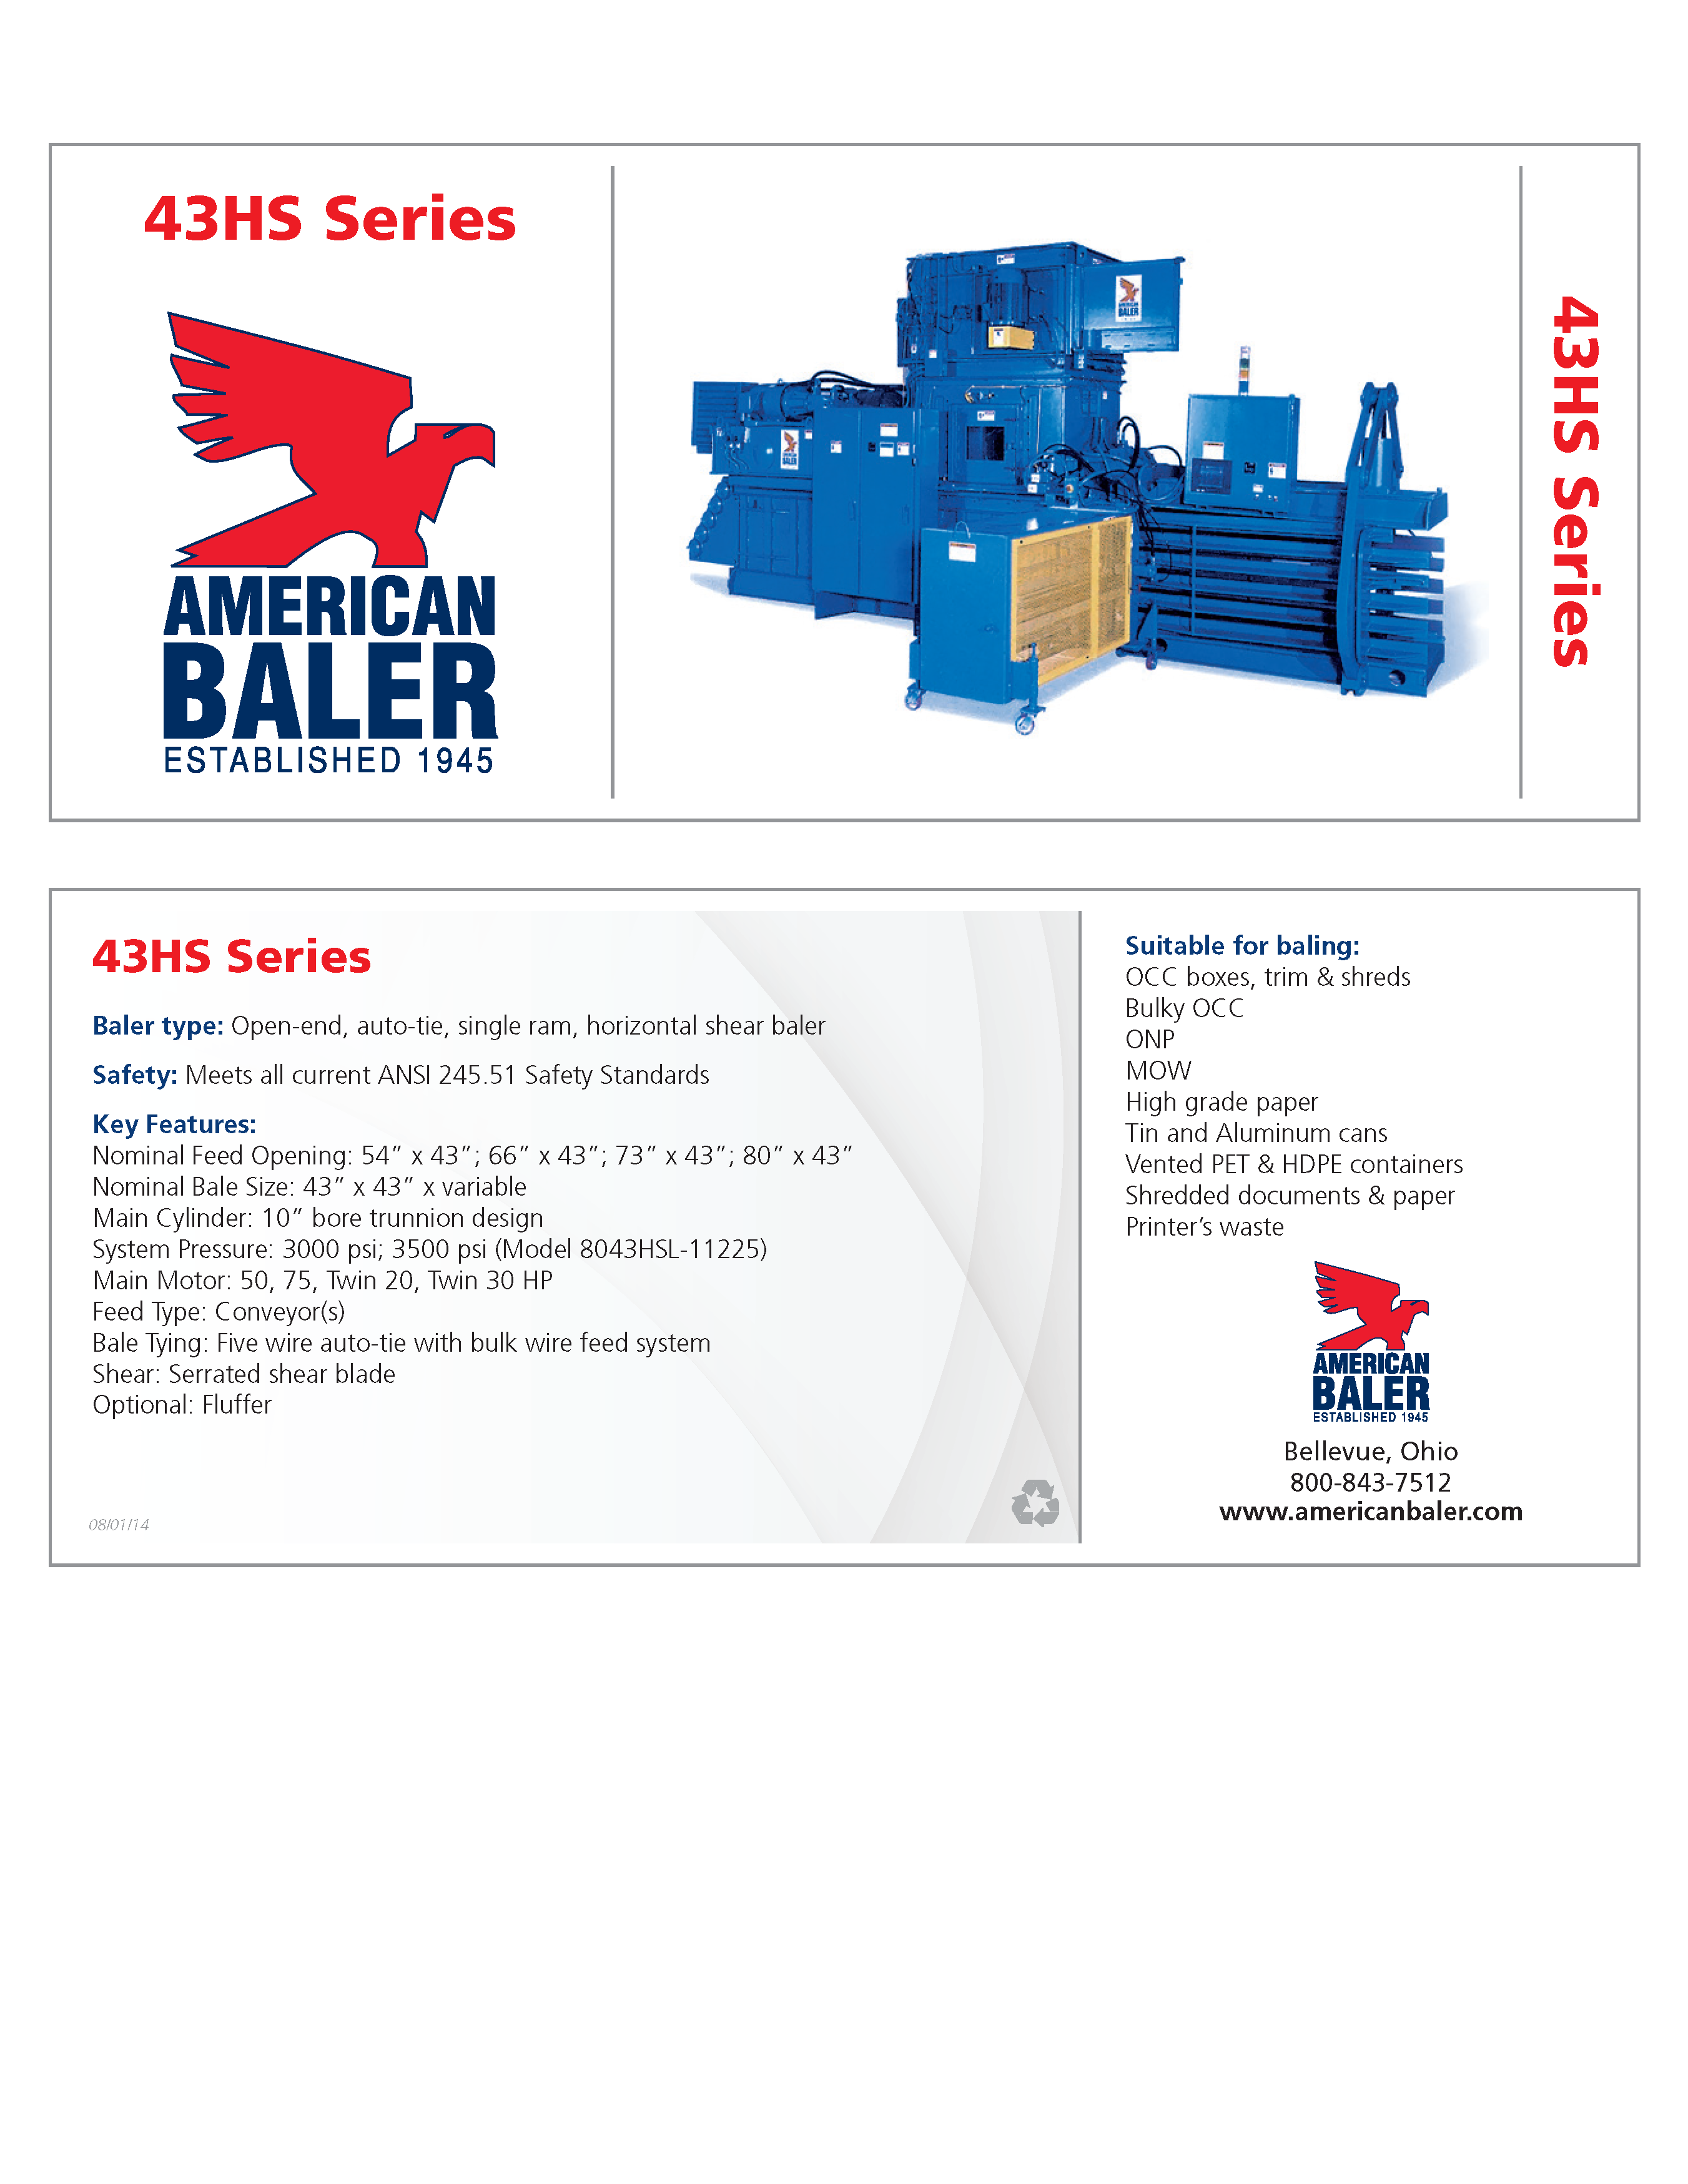 Learn more about the 43HS Series Baler in the American Baler Brochure. 